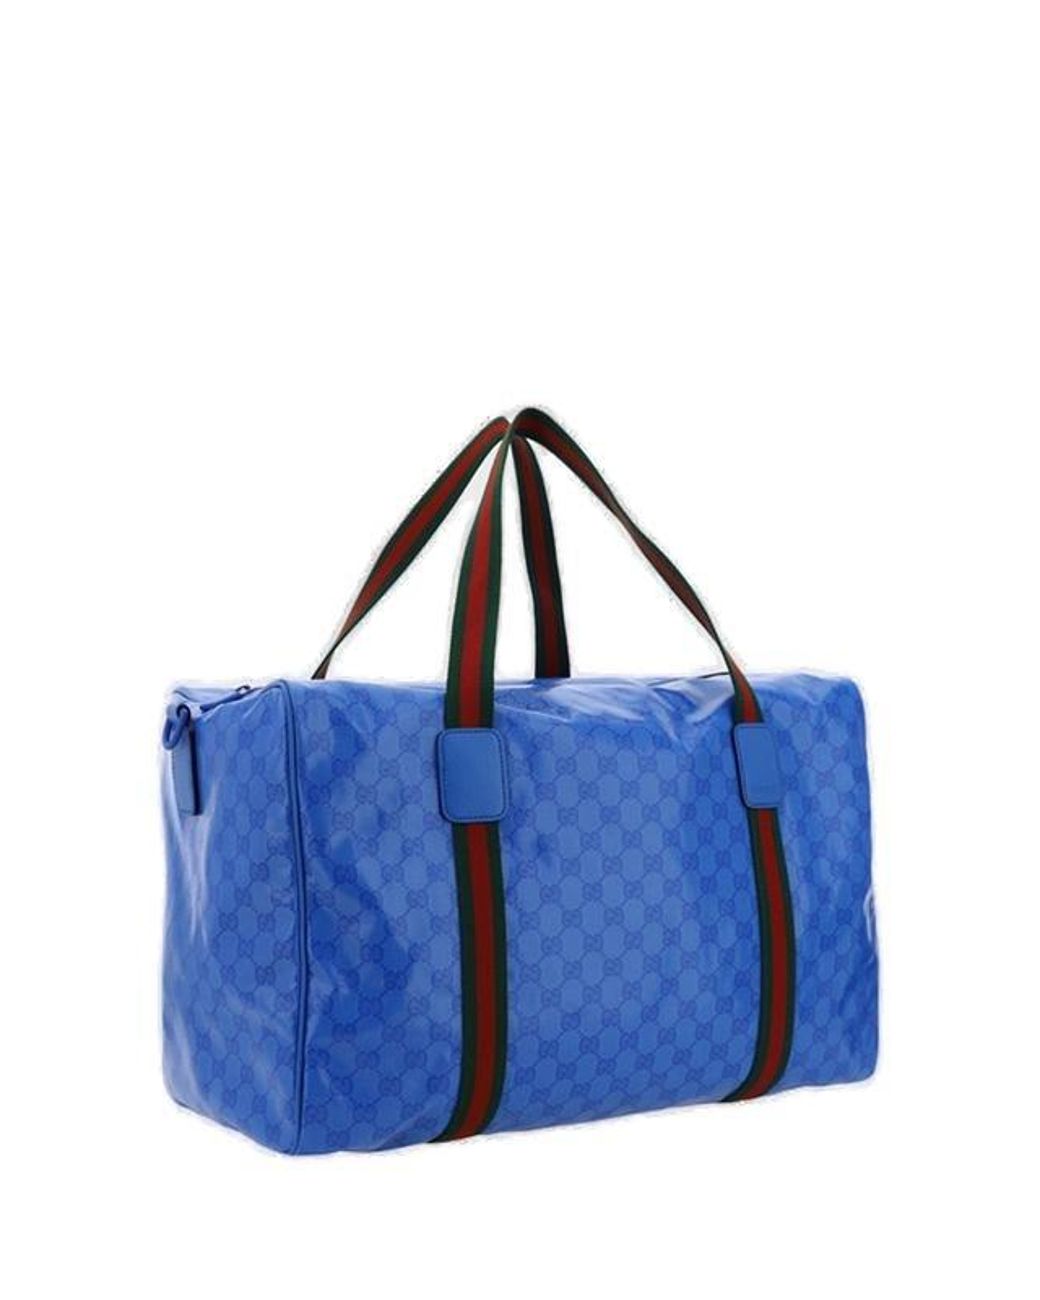 Large duffle bag with Web